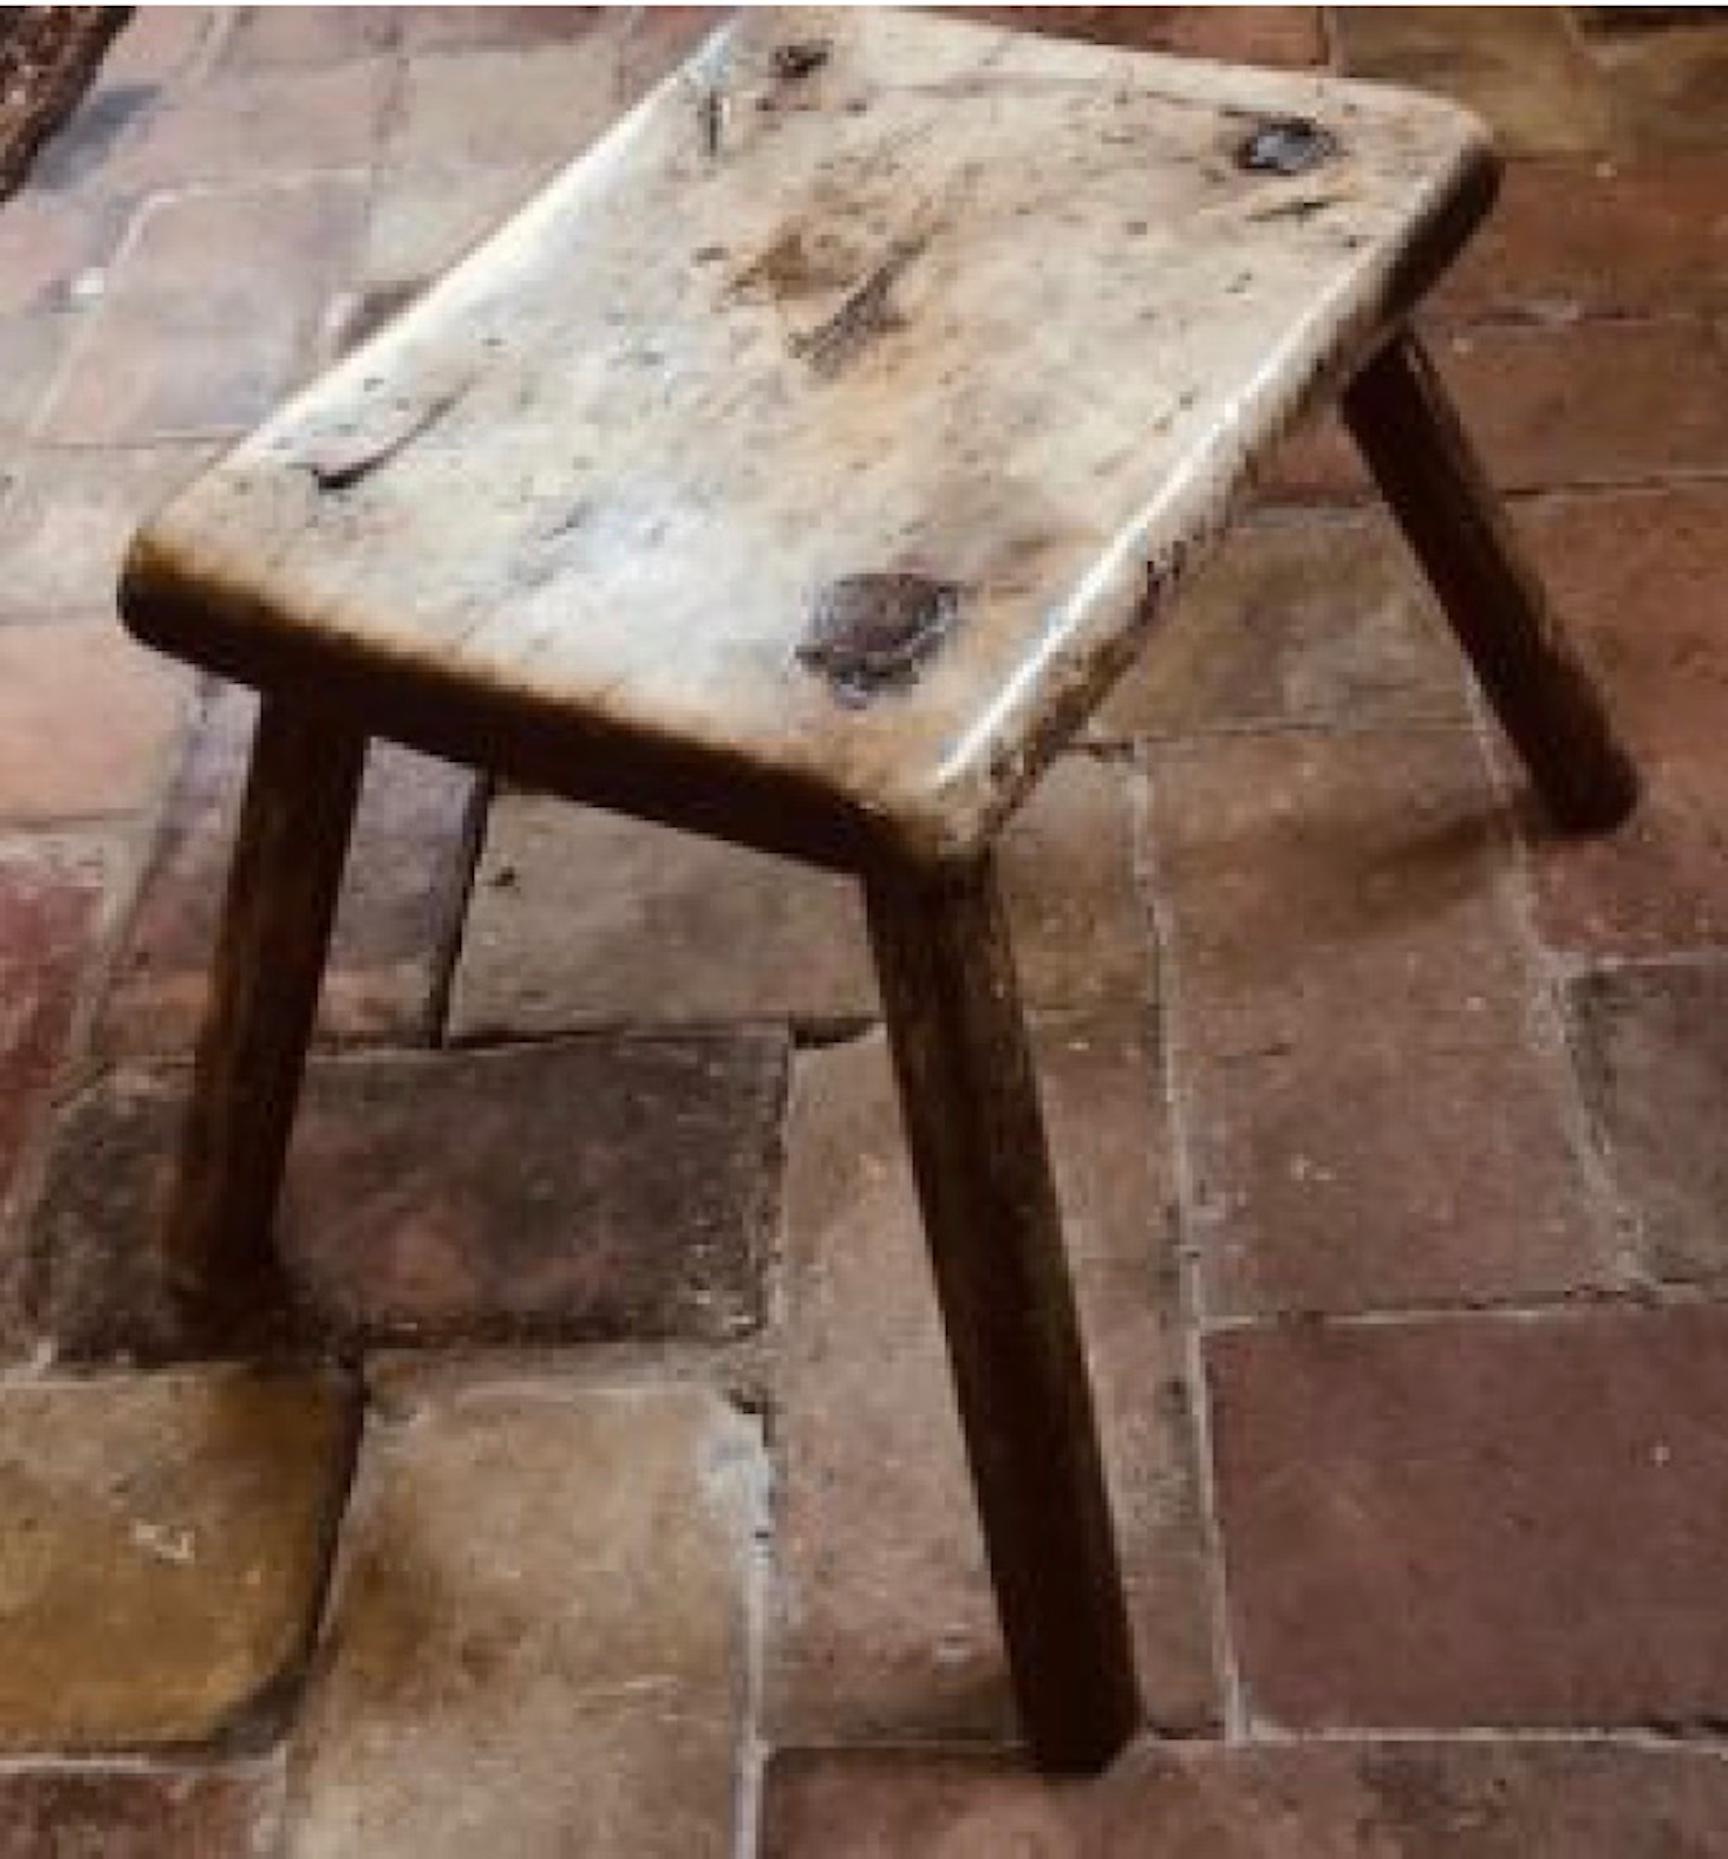 Early 18th century ash stool, beautifully crafted with dowel joinery. The ash wood is so wonderfully worn that the entire piece has the smoothest of finishes. 